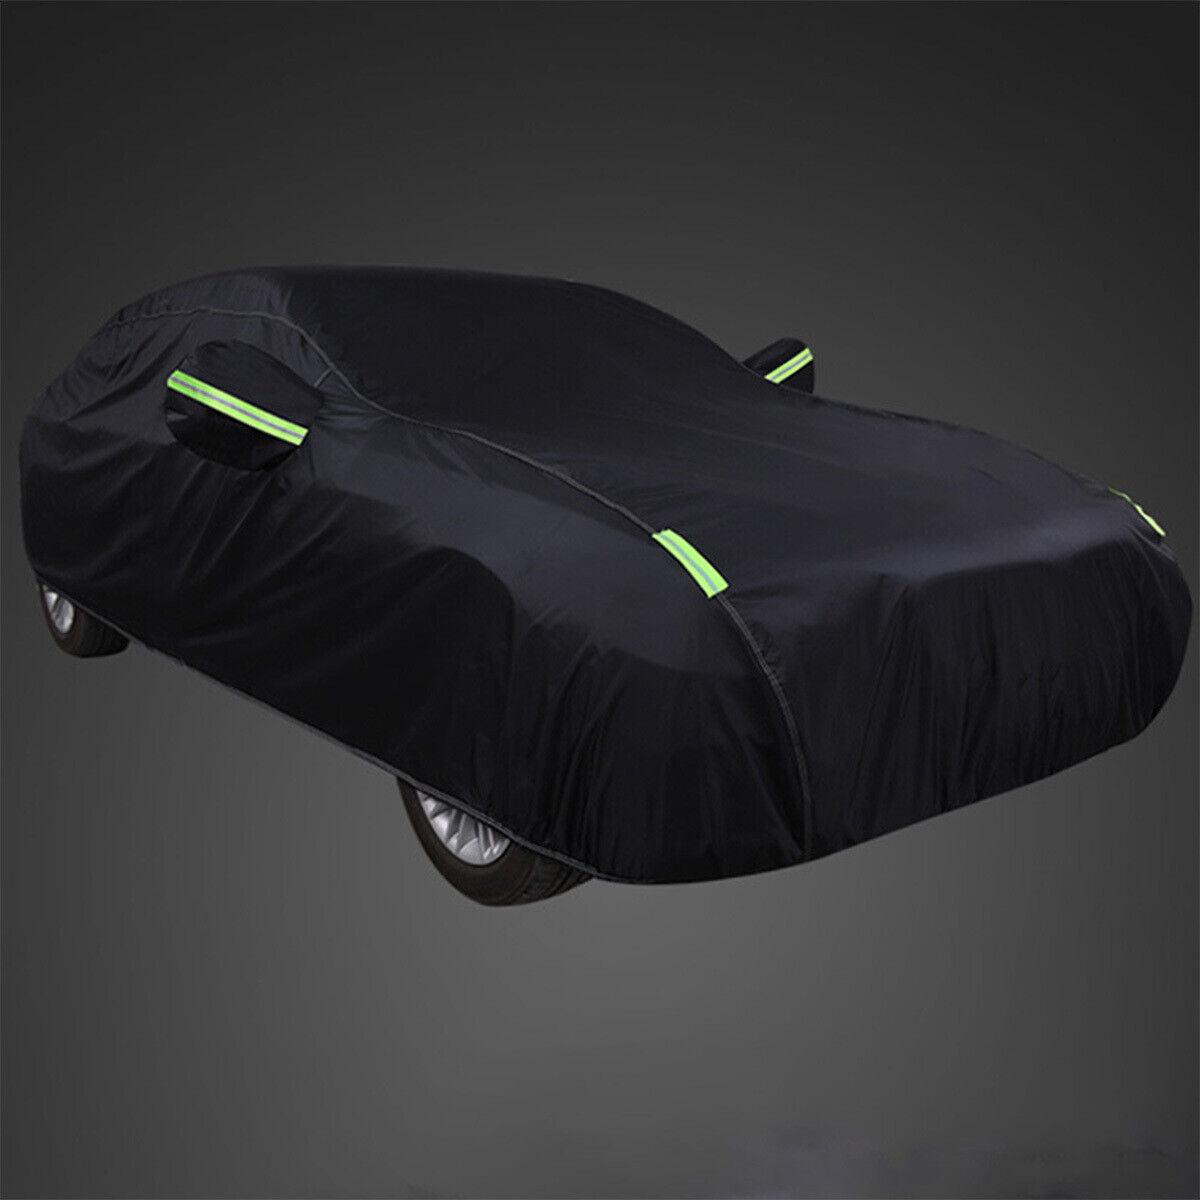 Car Cover For Model Y - TESLOVERY